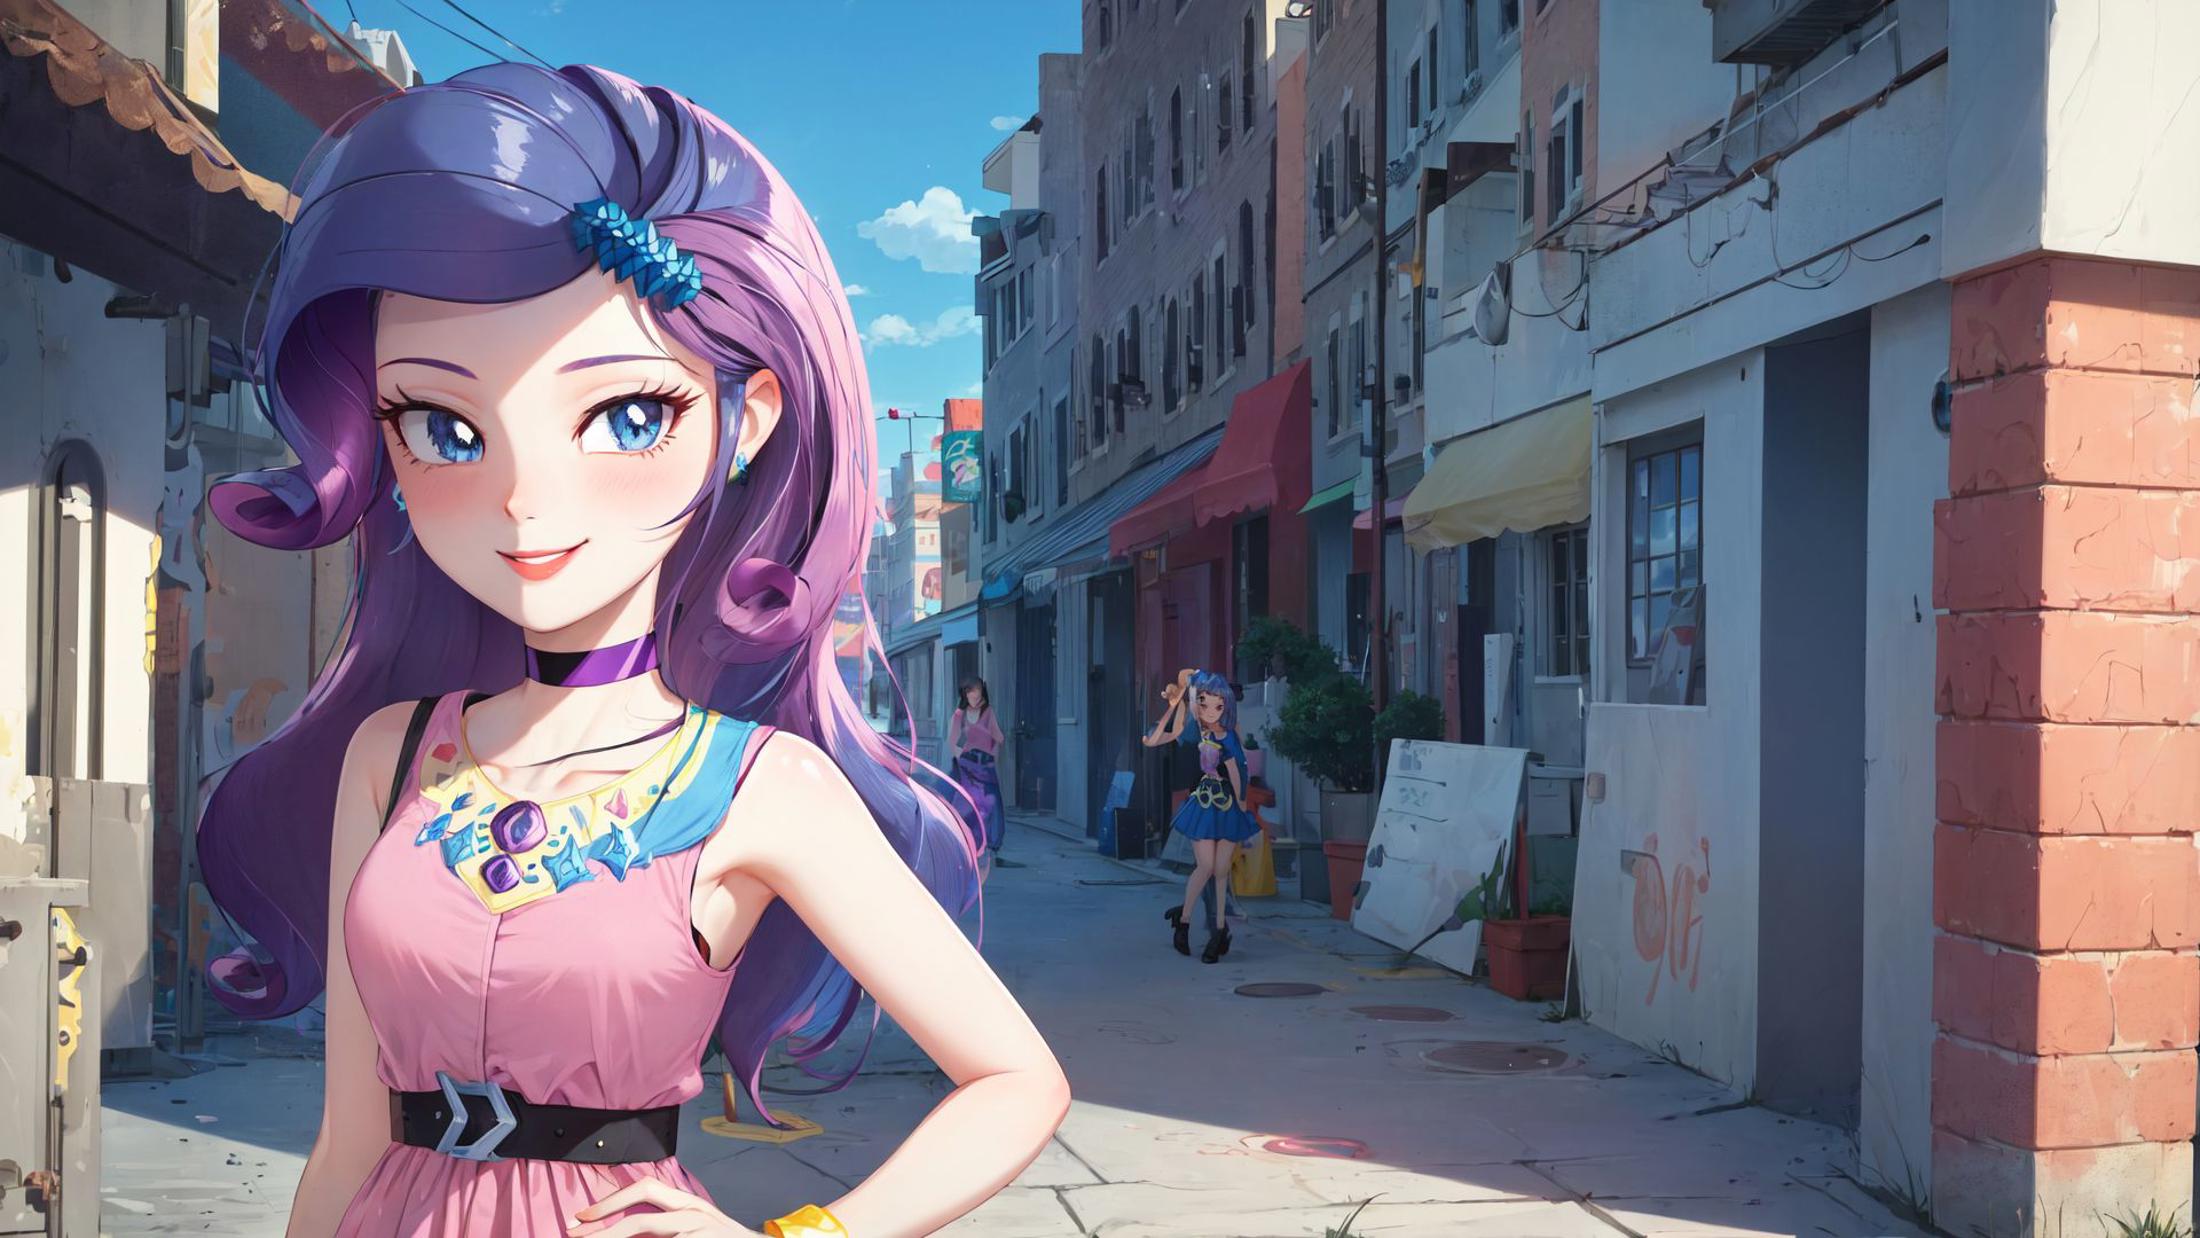 Rarity | My Little Pony / Equestria Girls image by marusame